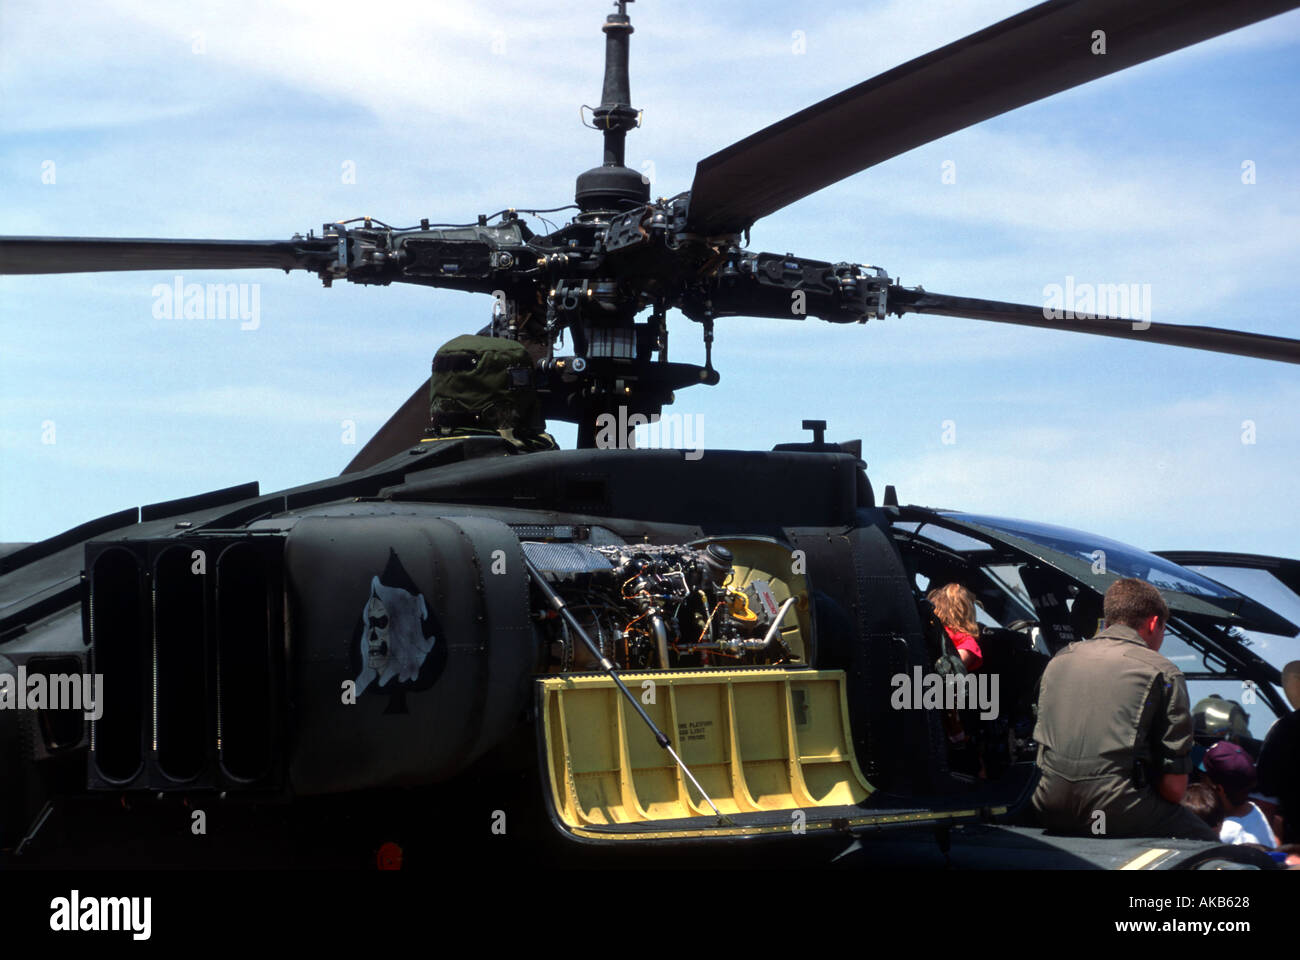 A close up view of a military helicopter or chopper shows complex mechanisms and four singular blades with a bright yellow panel Stock Photo